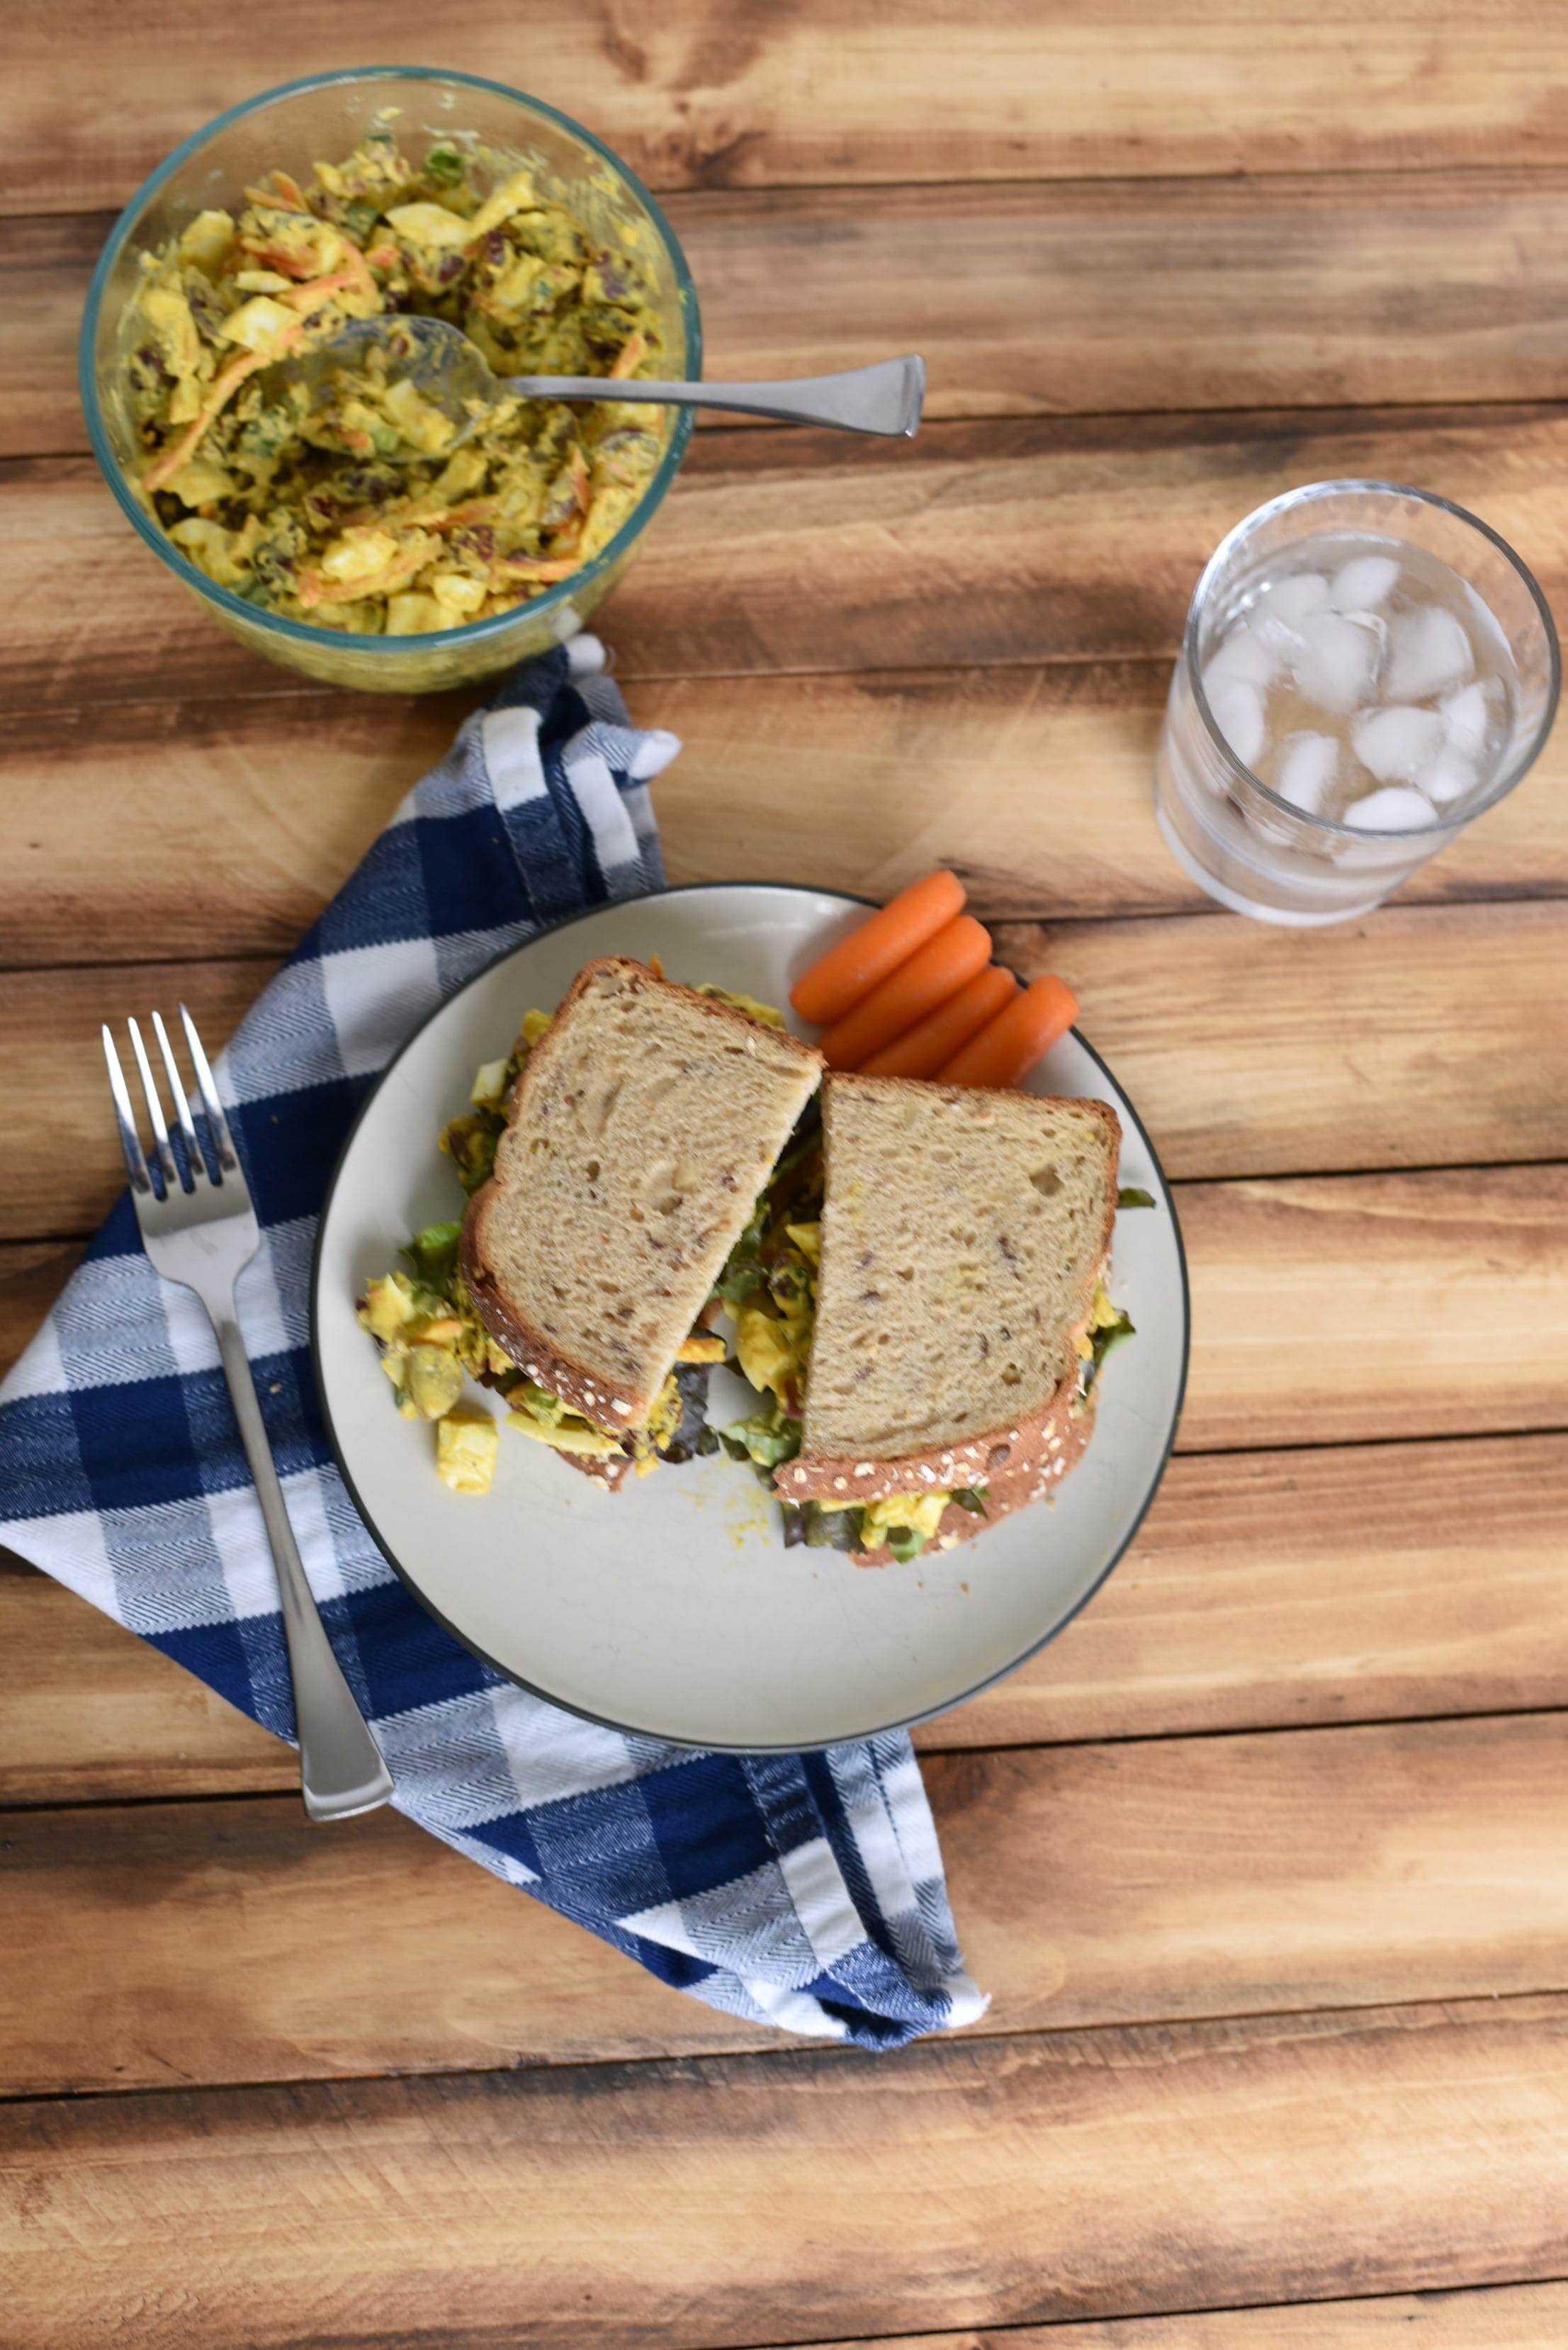 A wooden table with a bowl of curried egg salad, a plate with a sandwich and carrots, and a glass of water